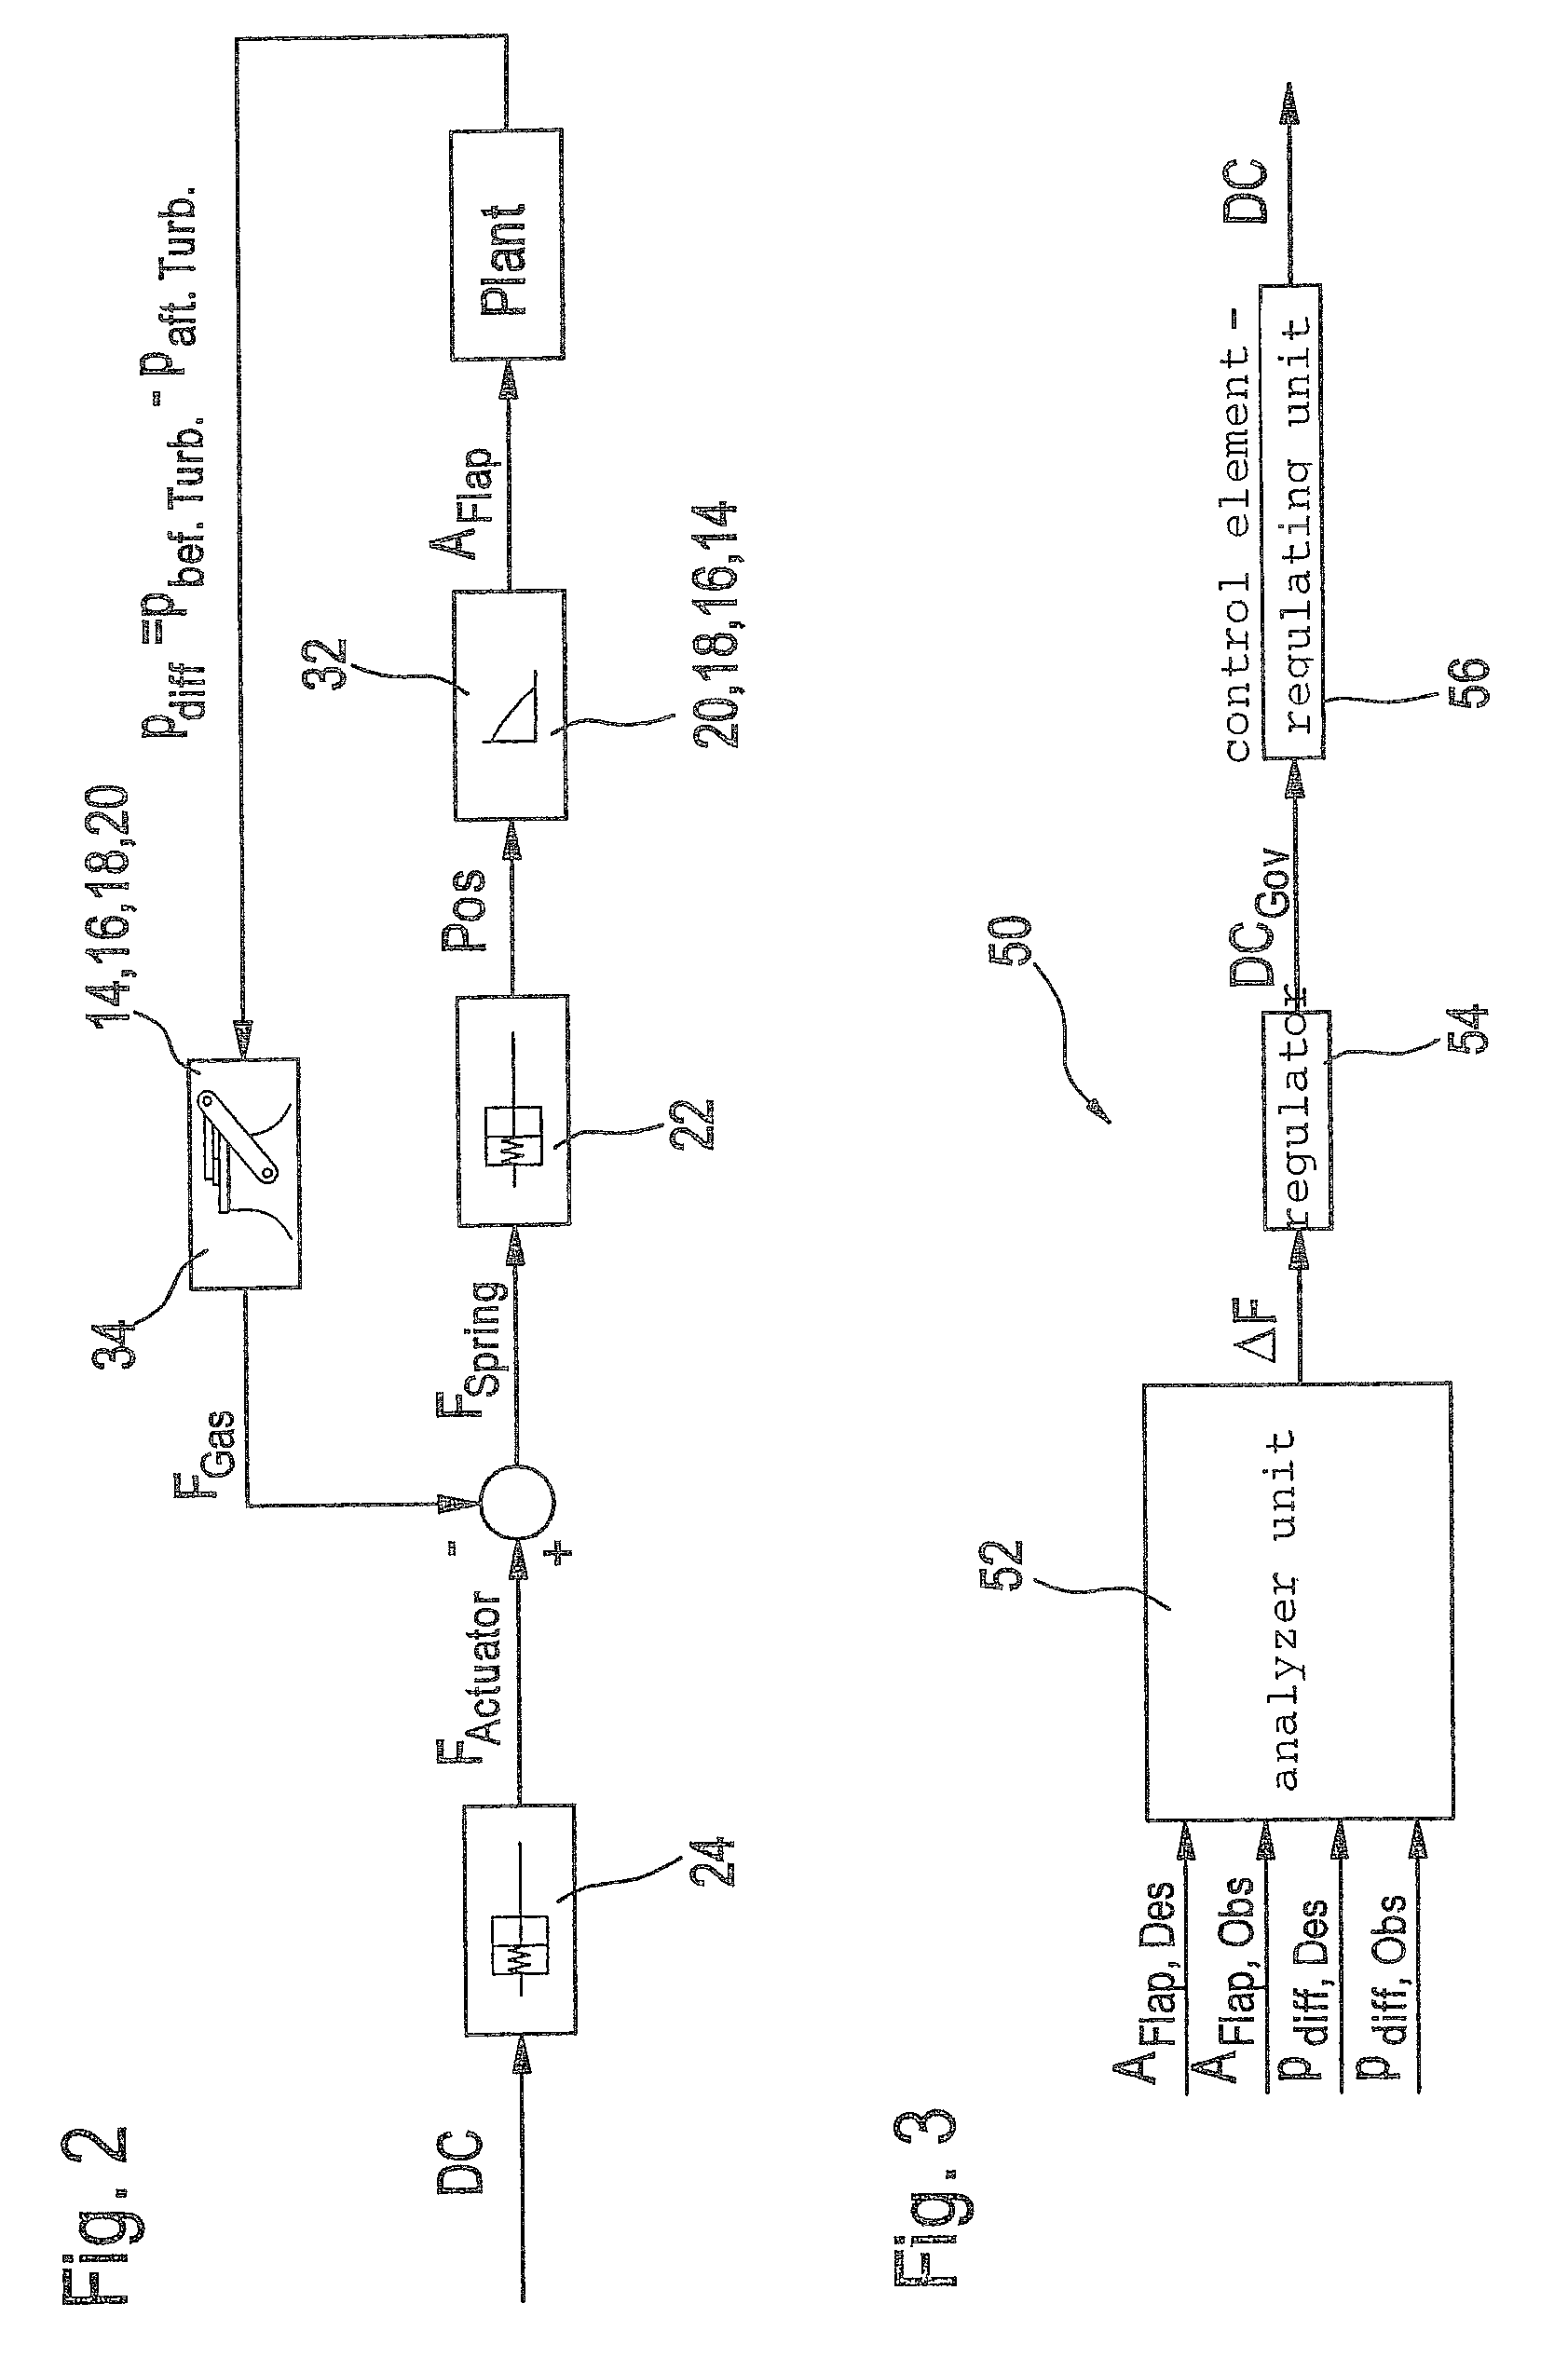 Regulator unit and method for regulating a flap opening of a flap situated in a mass flow line